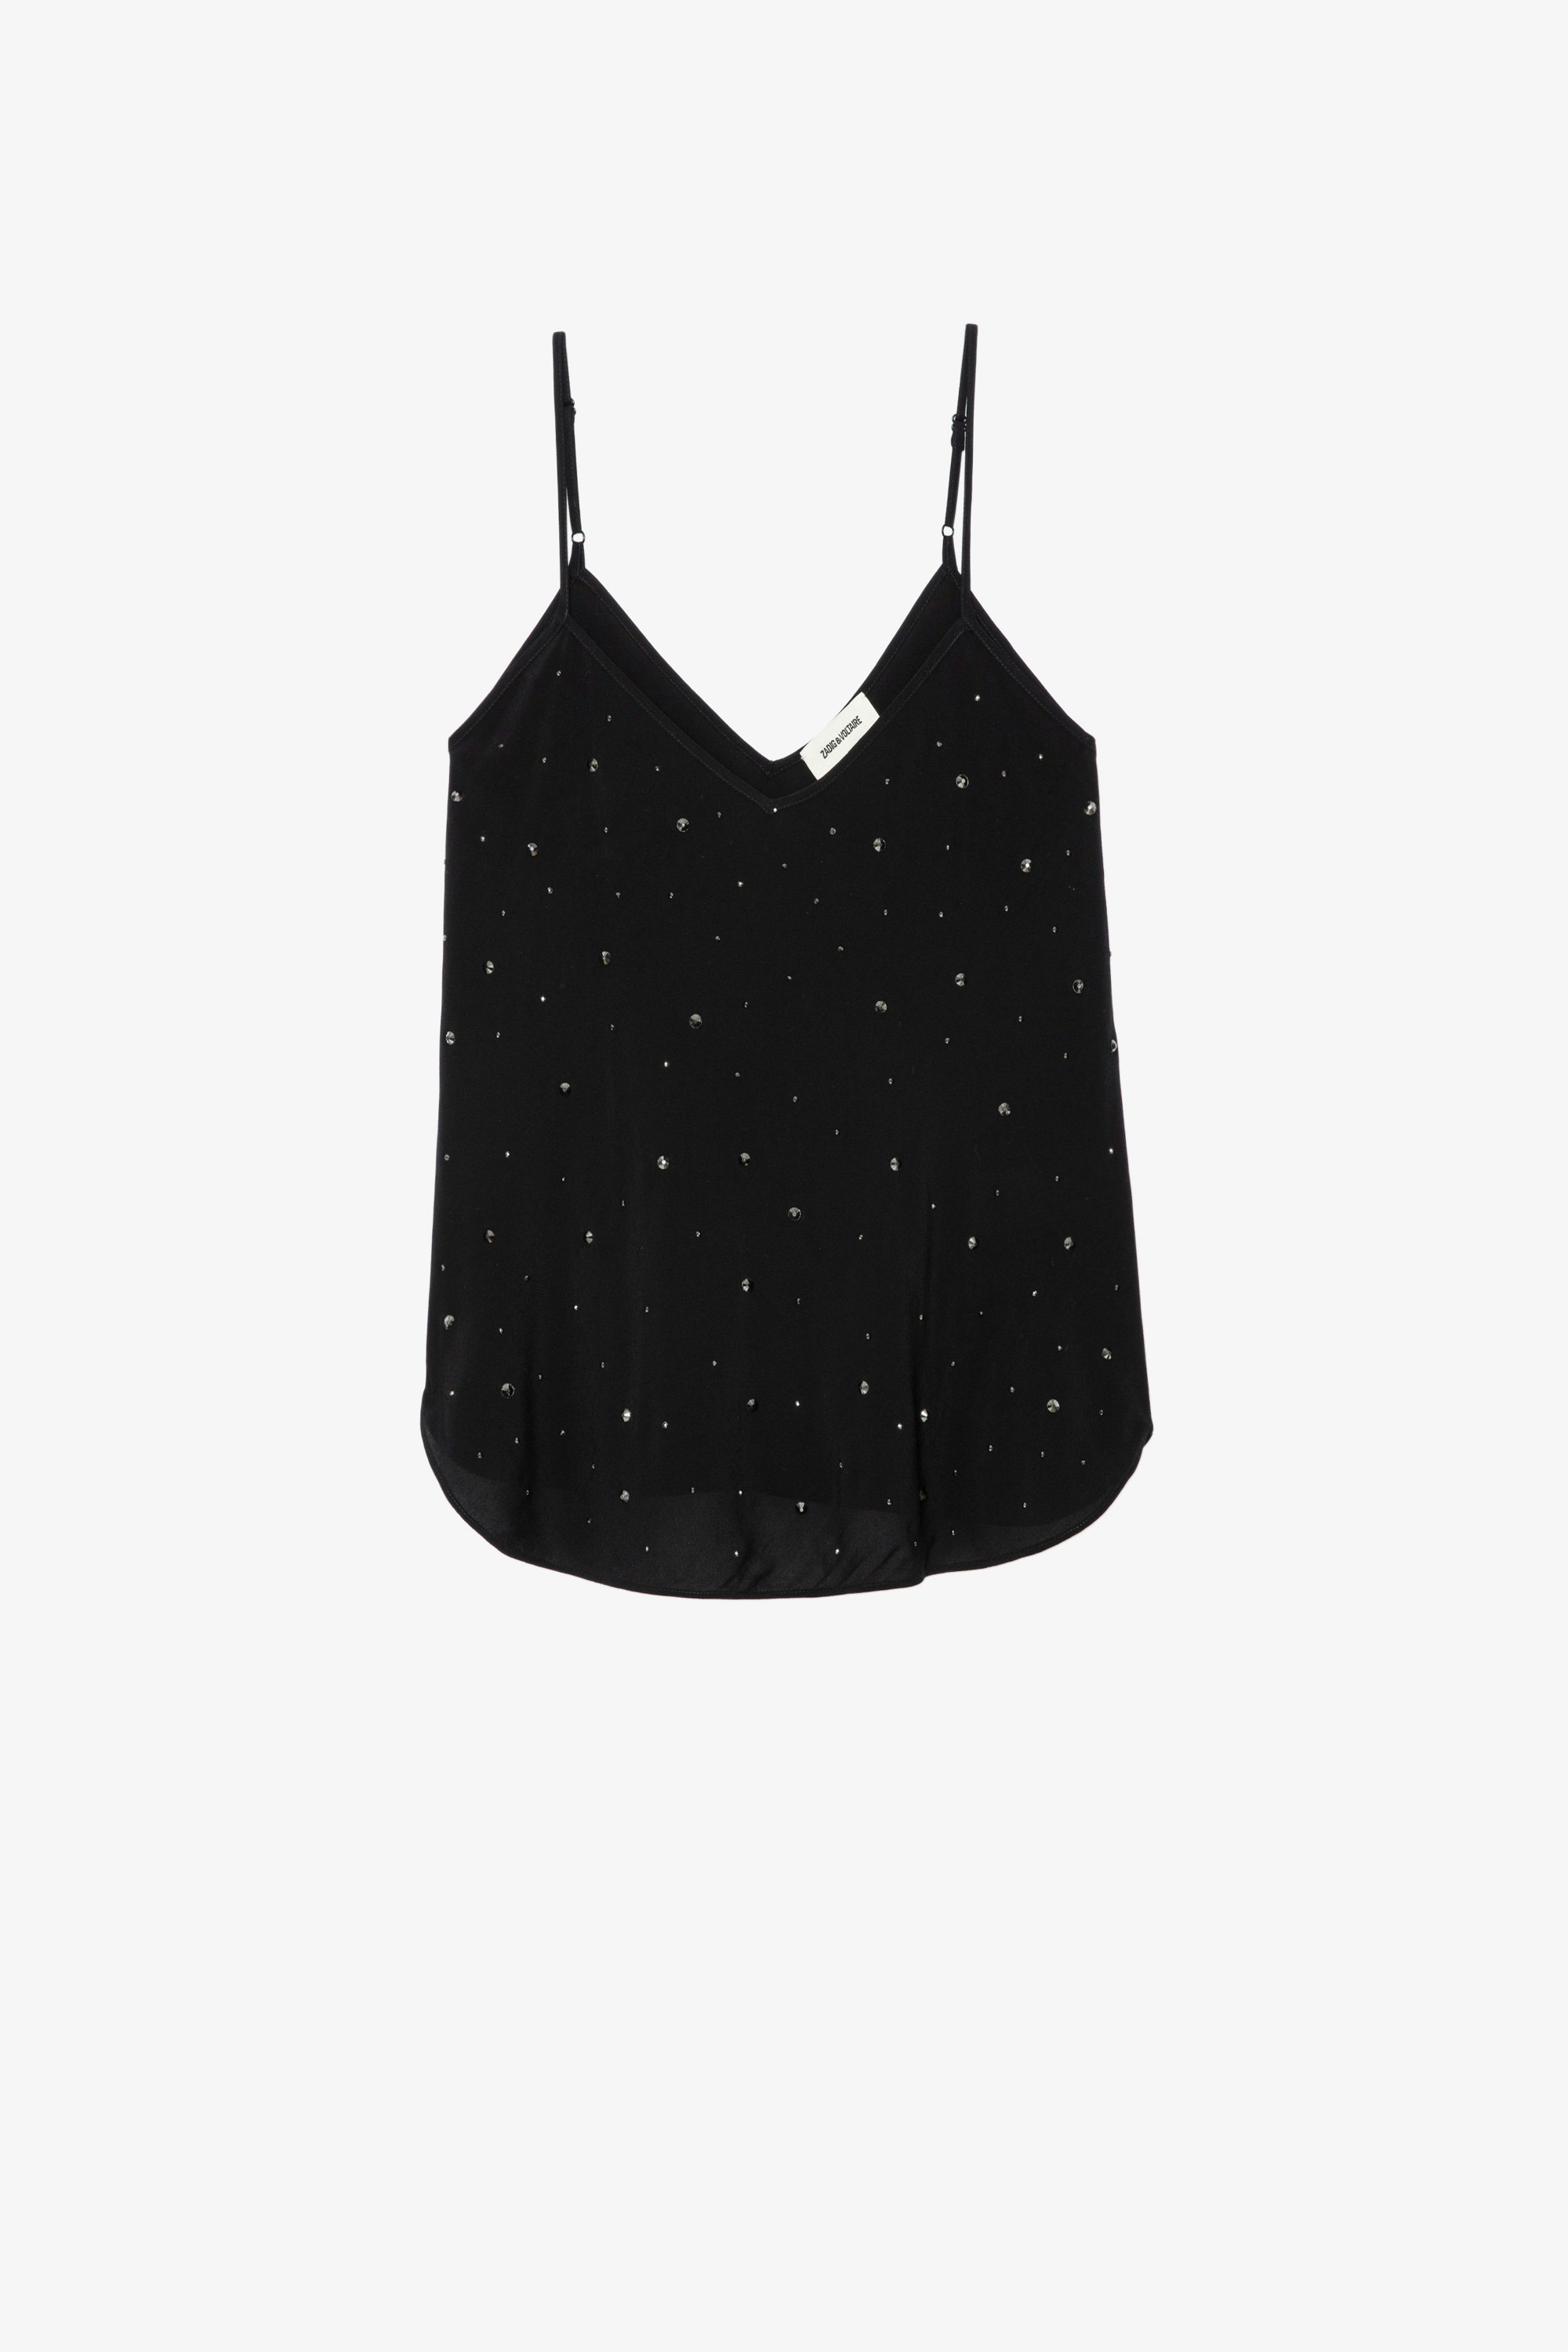 Casel Soft Strass Camisole Women’s black camisole with crystal embellishment